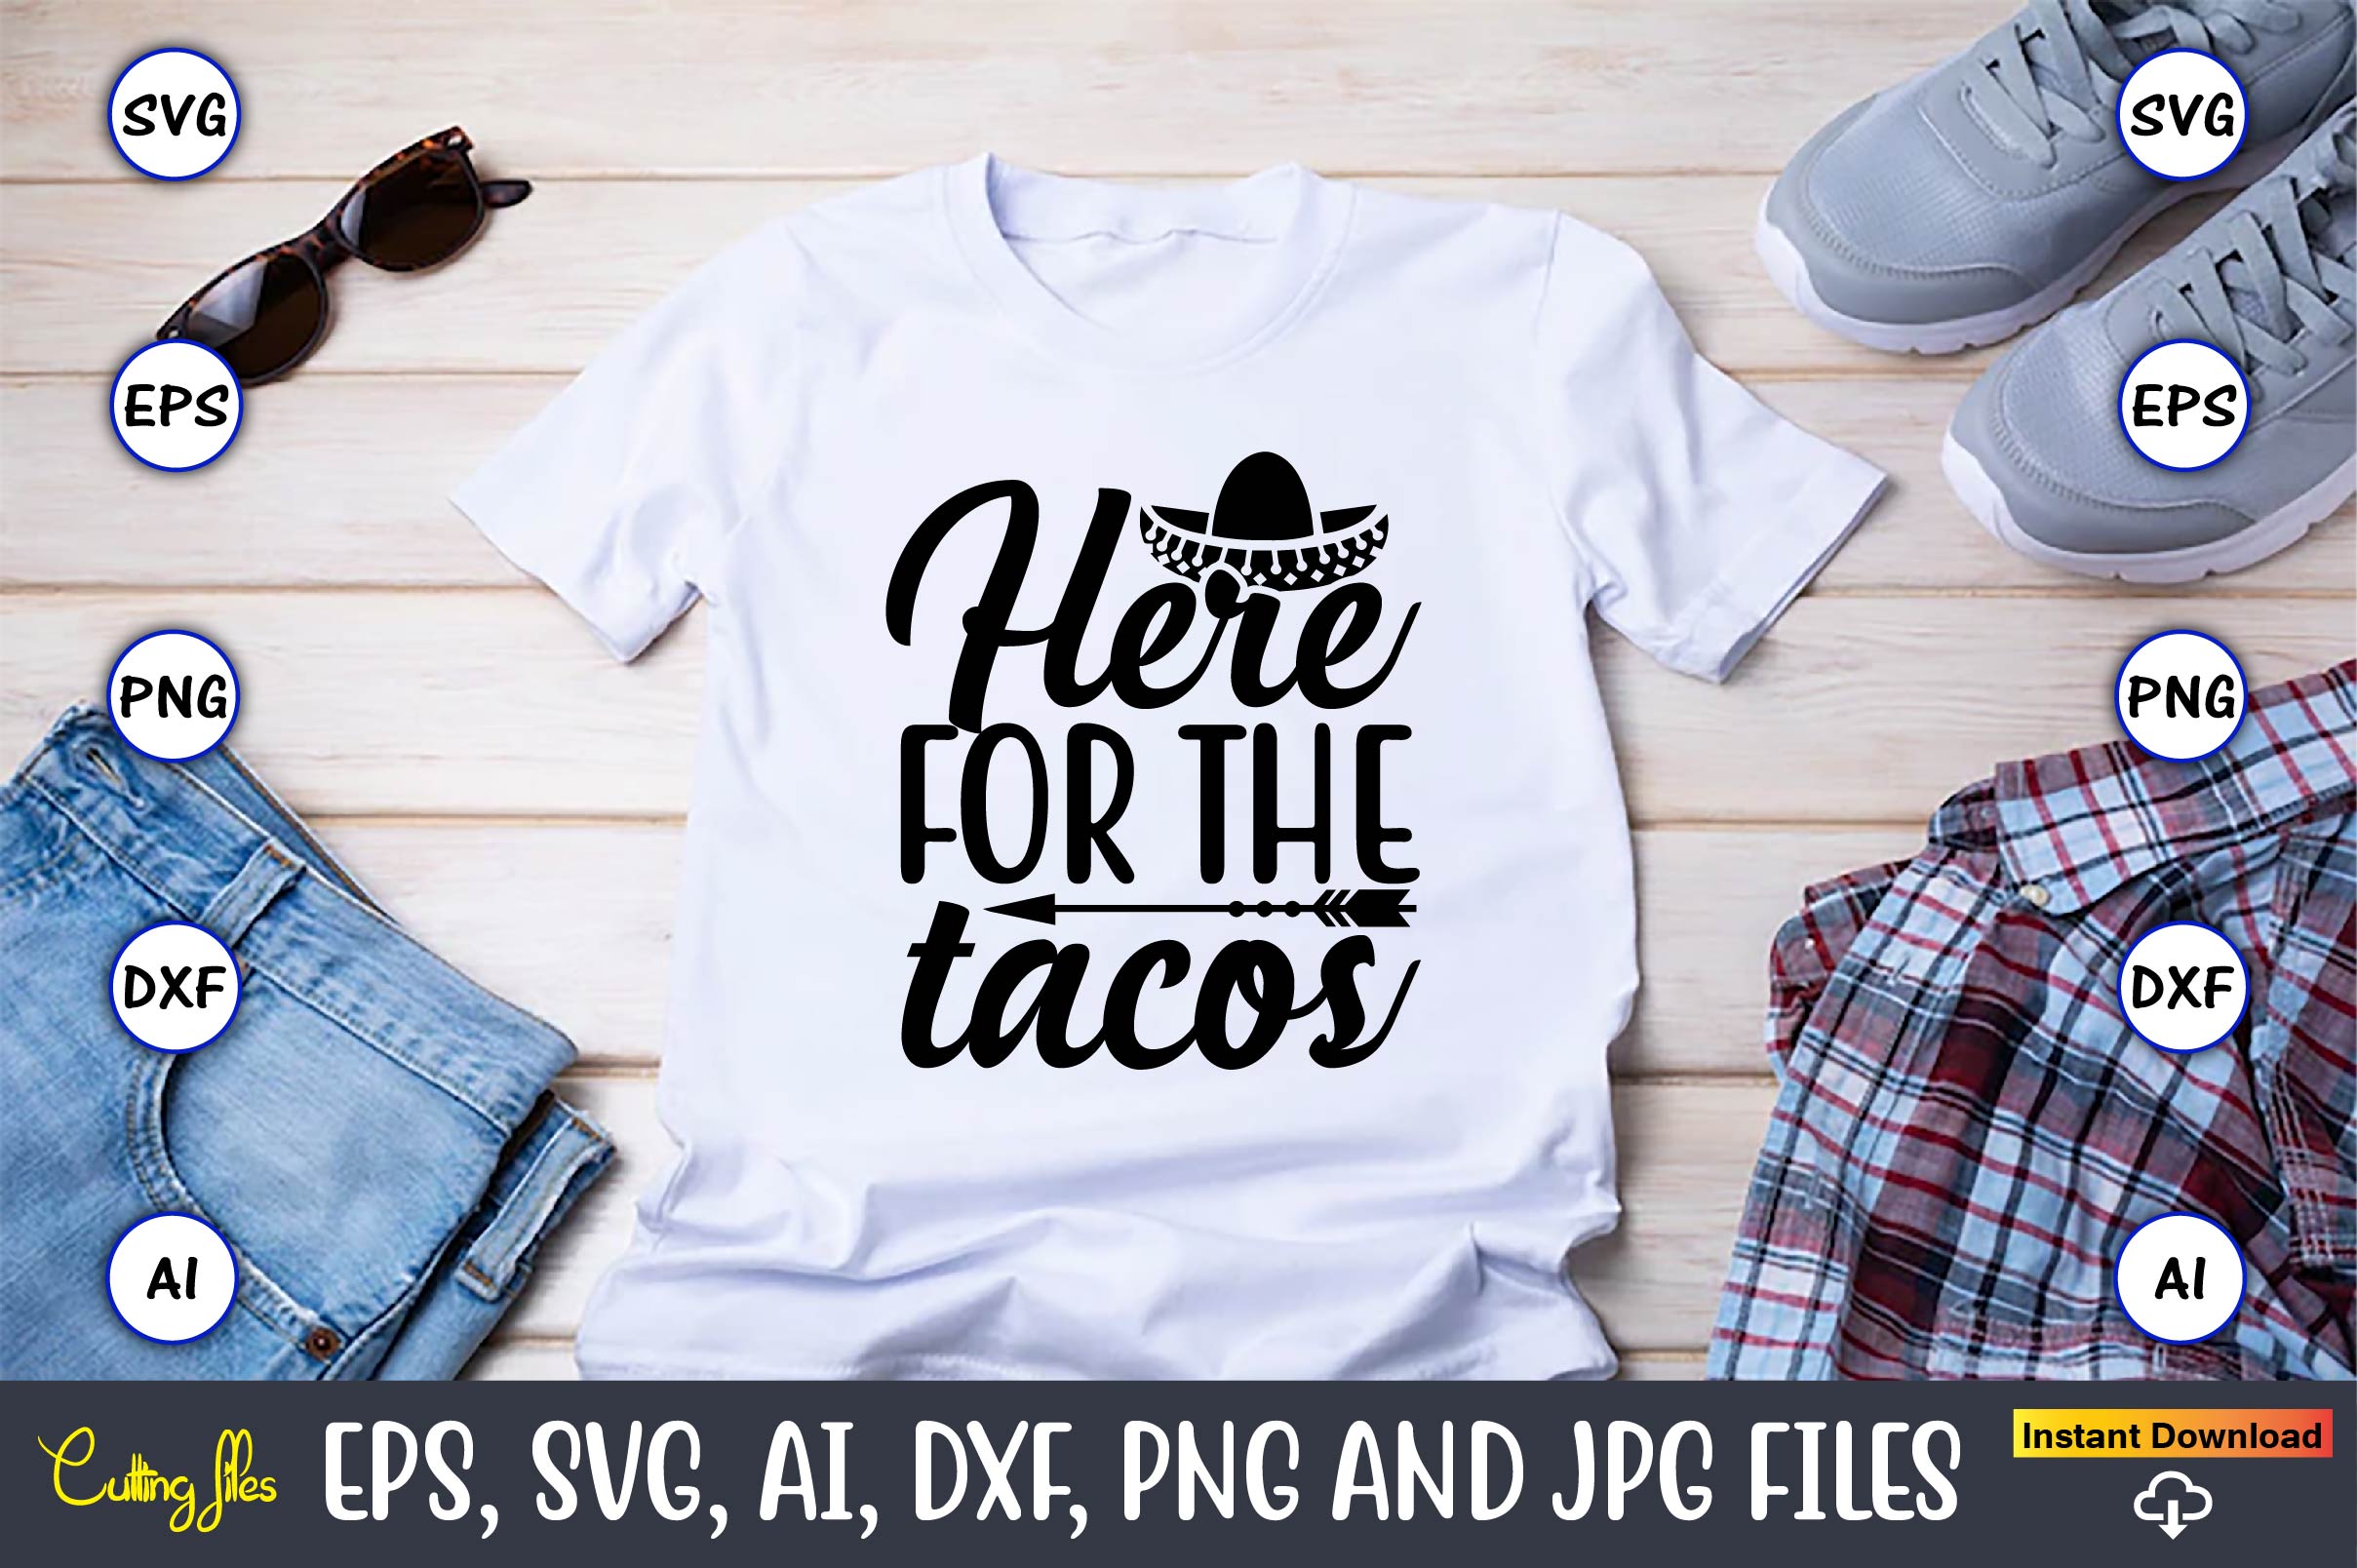 Image of a white t-shirt with a great slogan Here for the tacos.